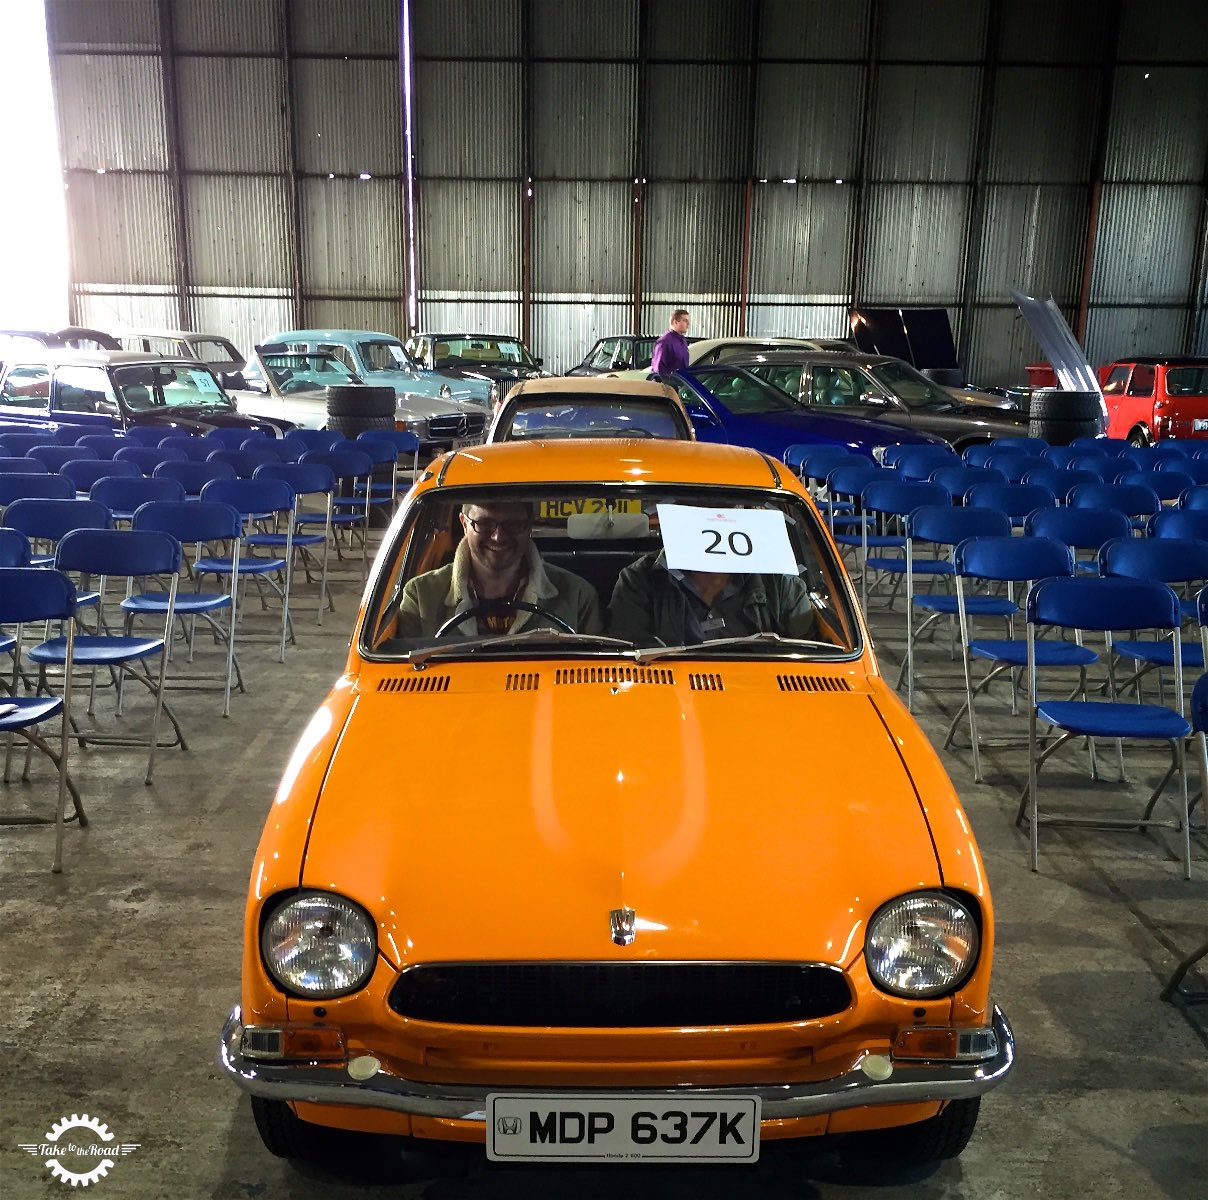 Take to the Road - What You Should Know Before Attending a Classic Car Auction